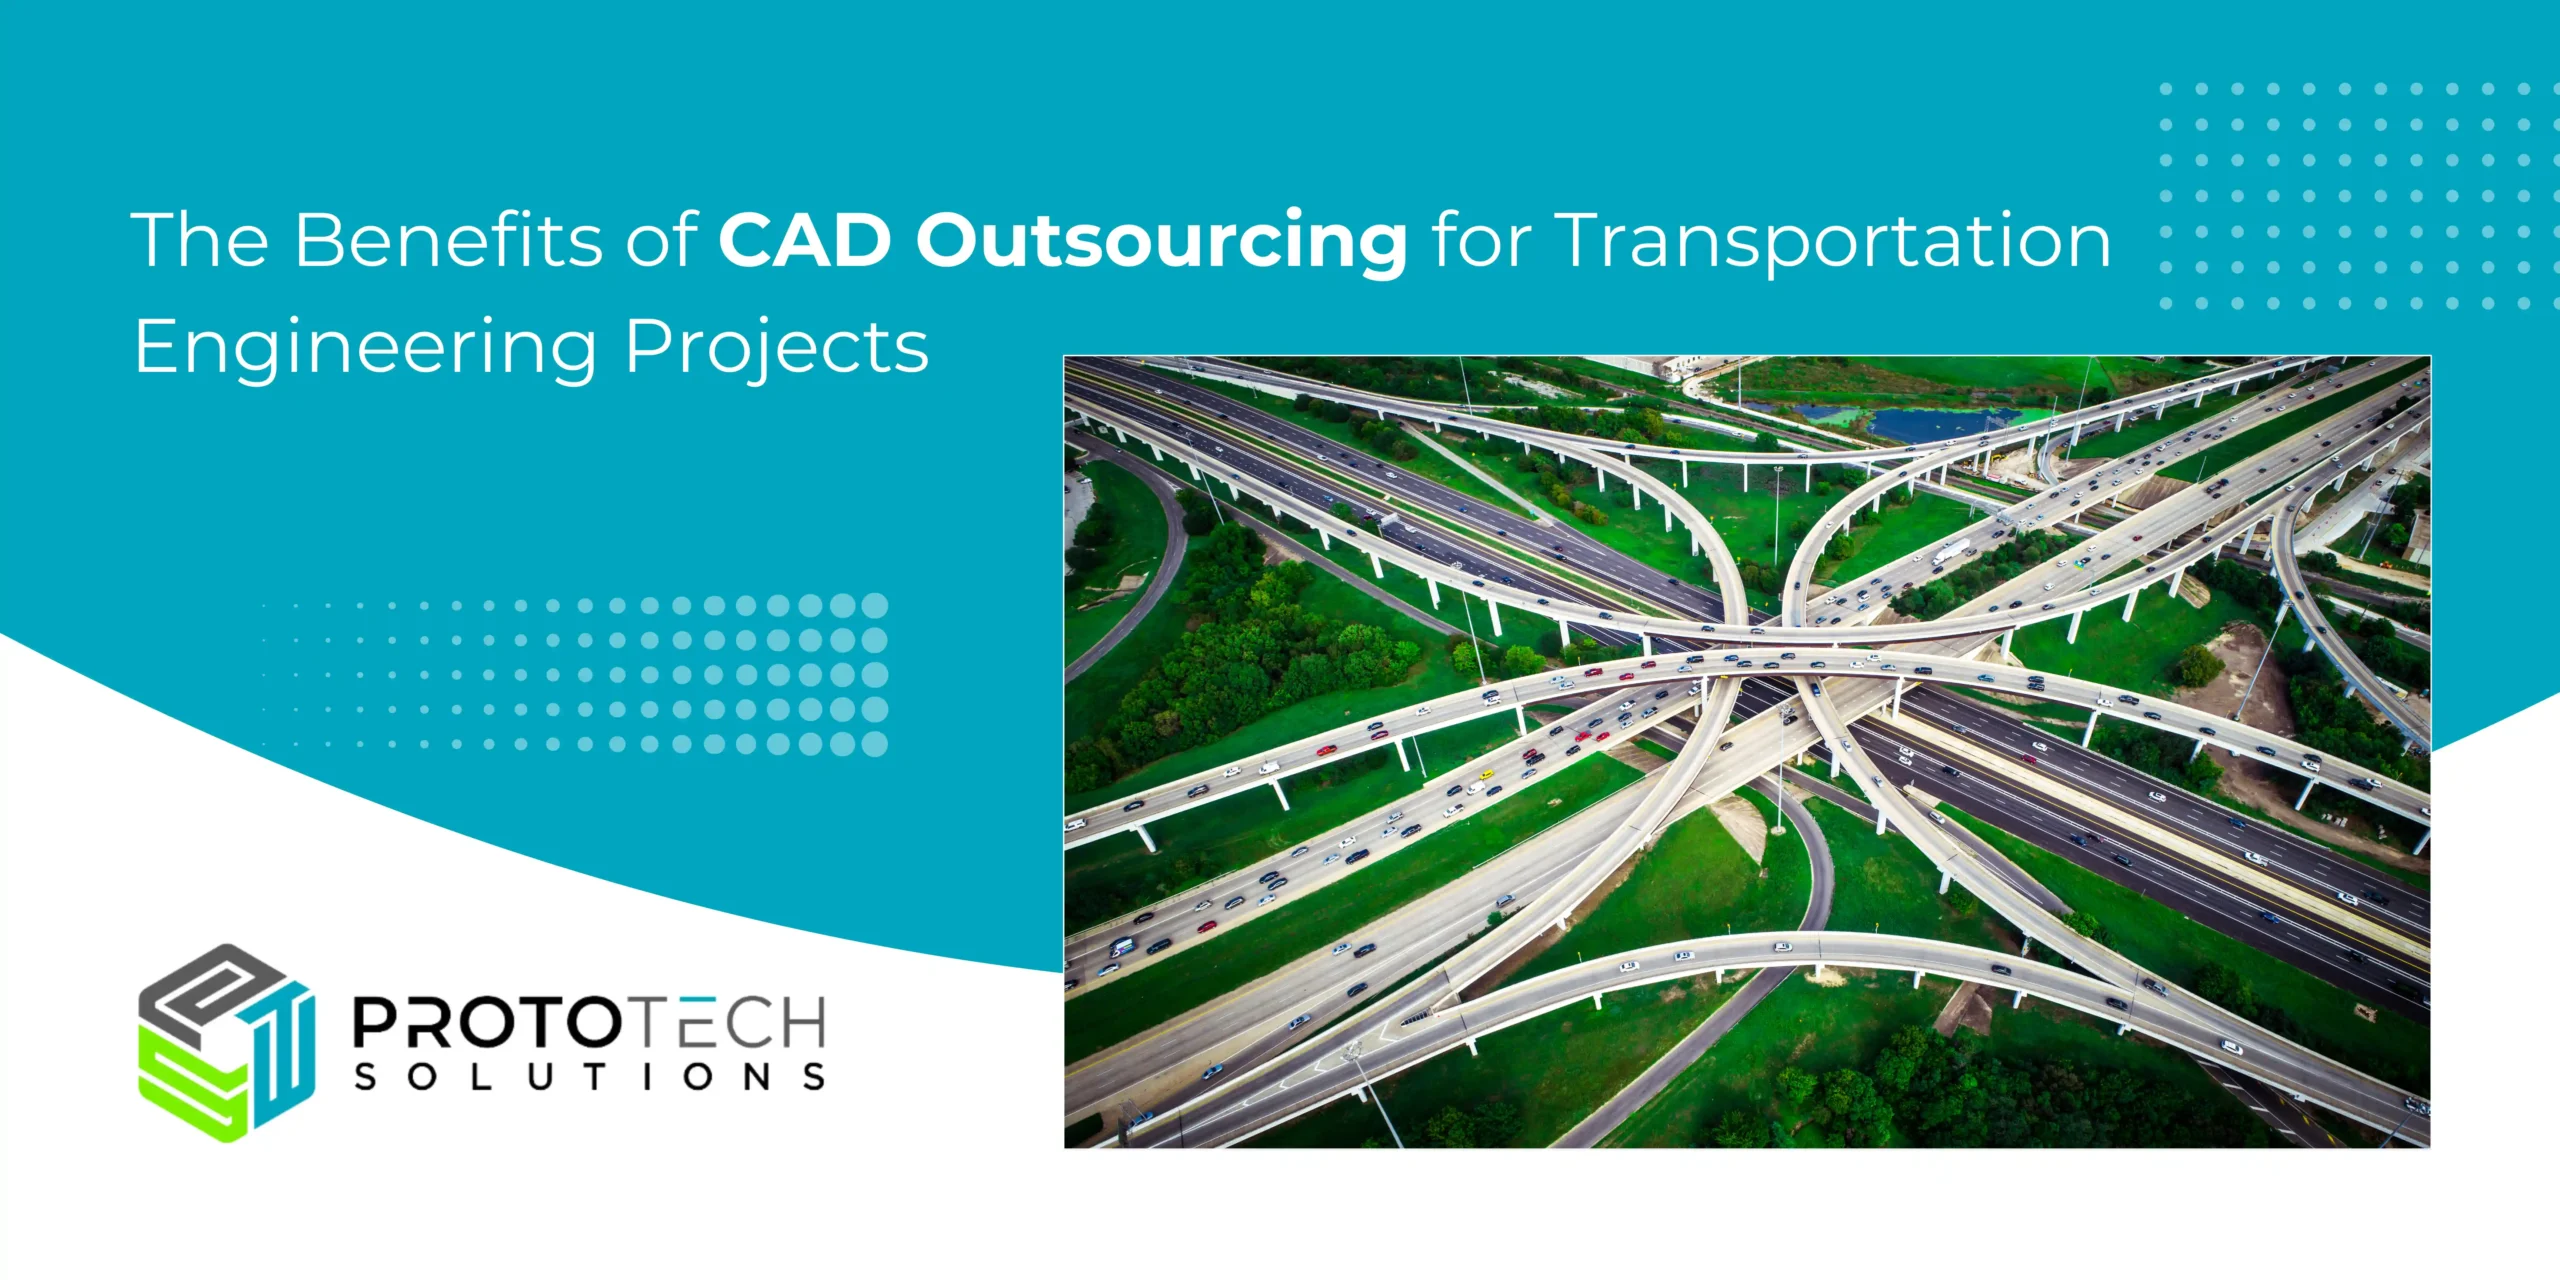 The Benefits of CAD Outsourcing for Transportation Engineering Projects